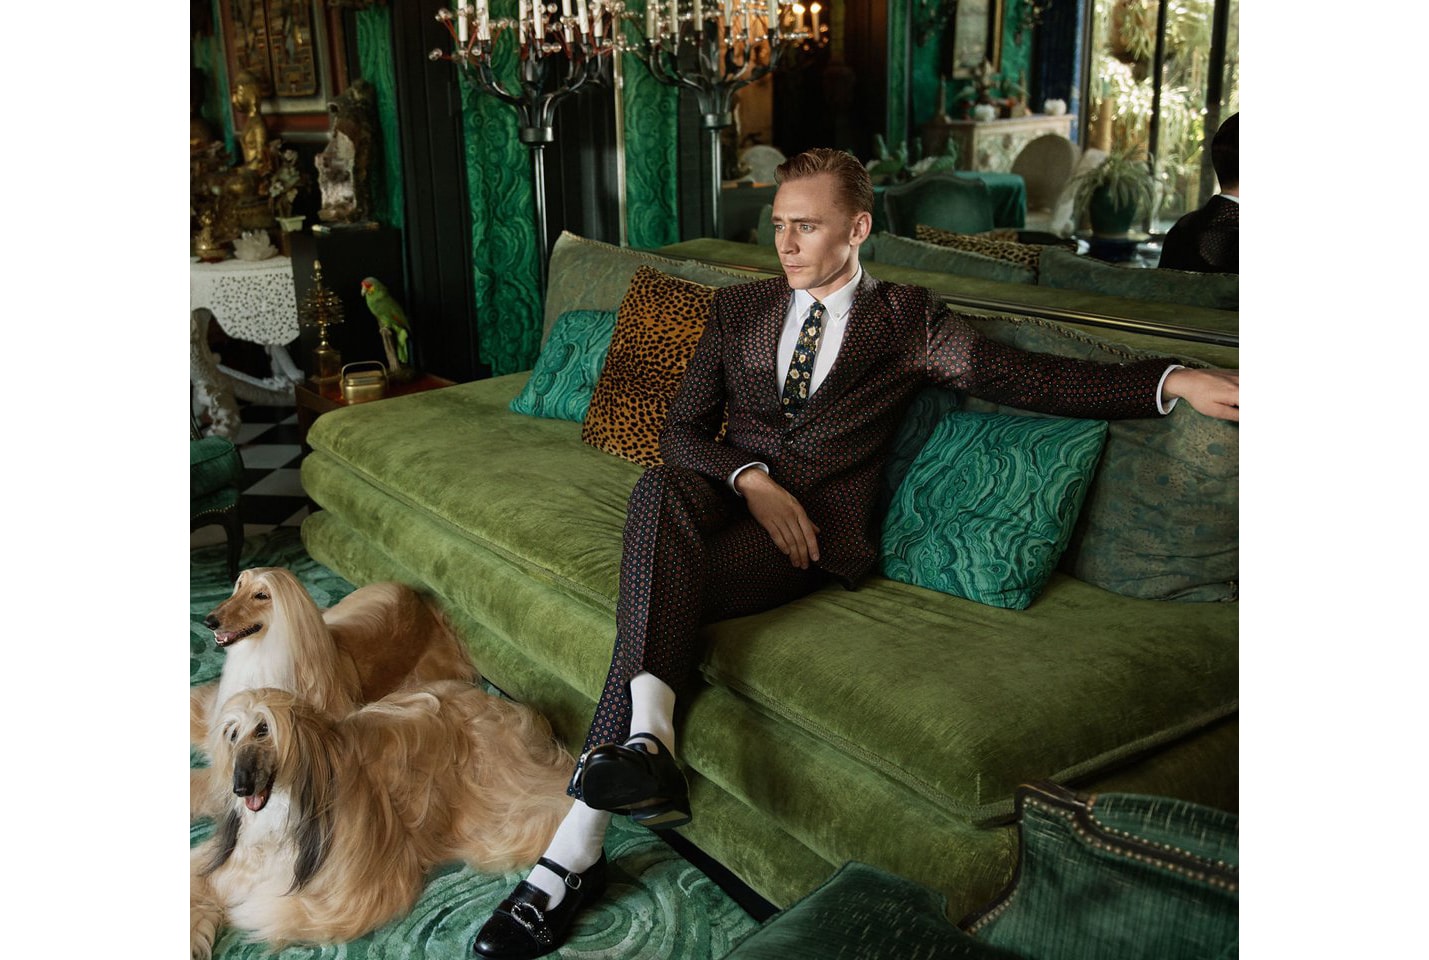 Tom Hiddleston Models for New Gucci Campaign Ads dog Taylor Swift Cruise 2017